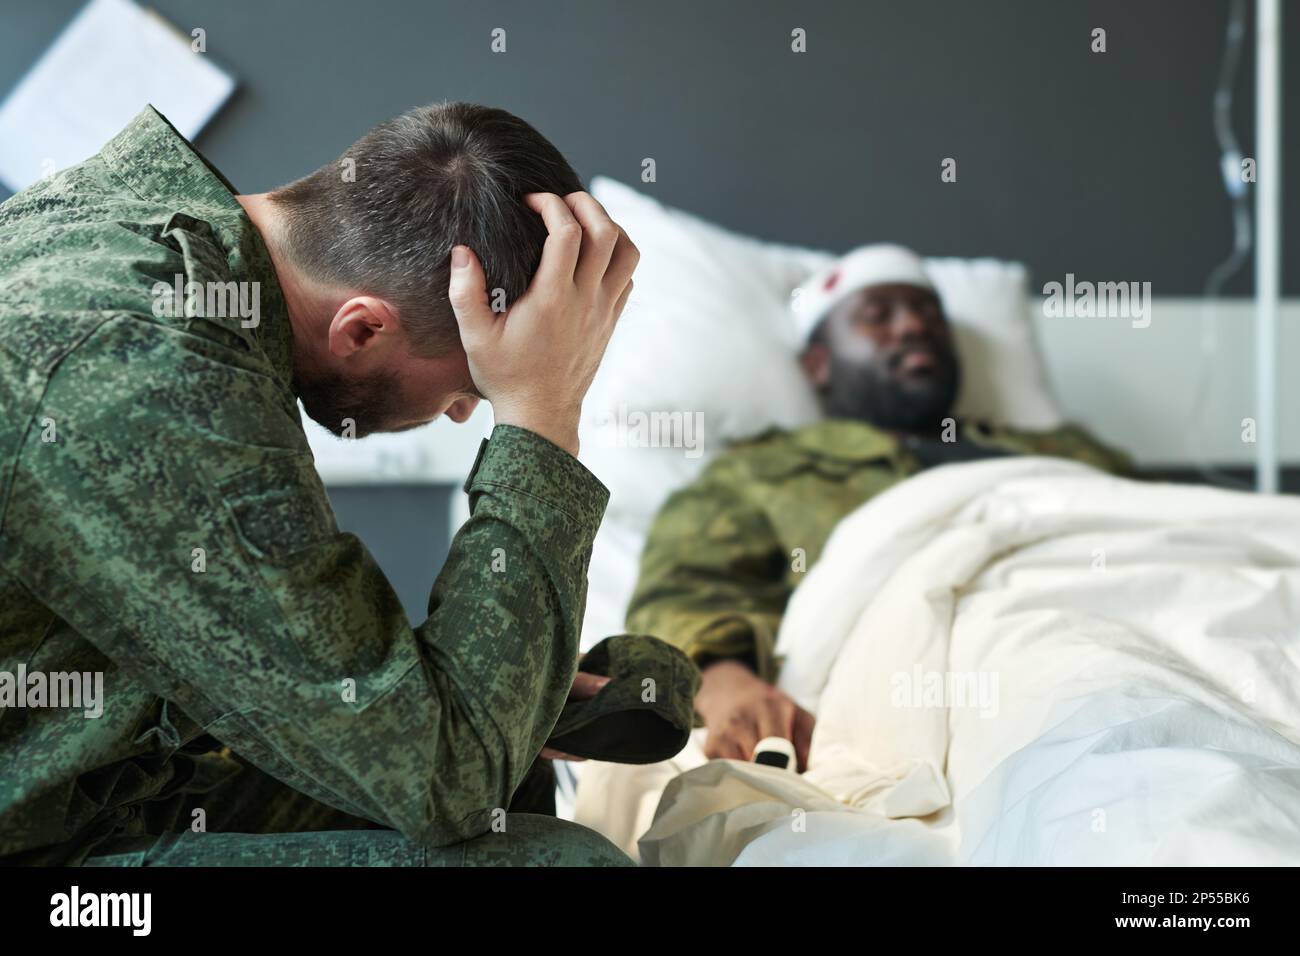 Young worried soldier in camouflage touching head while sitting by his friend in hospital bed after injury during military activities Stock Photo